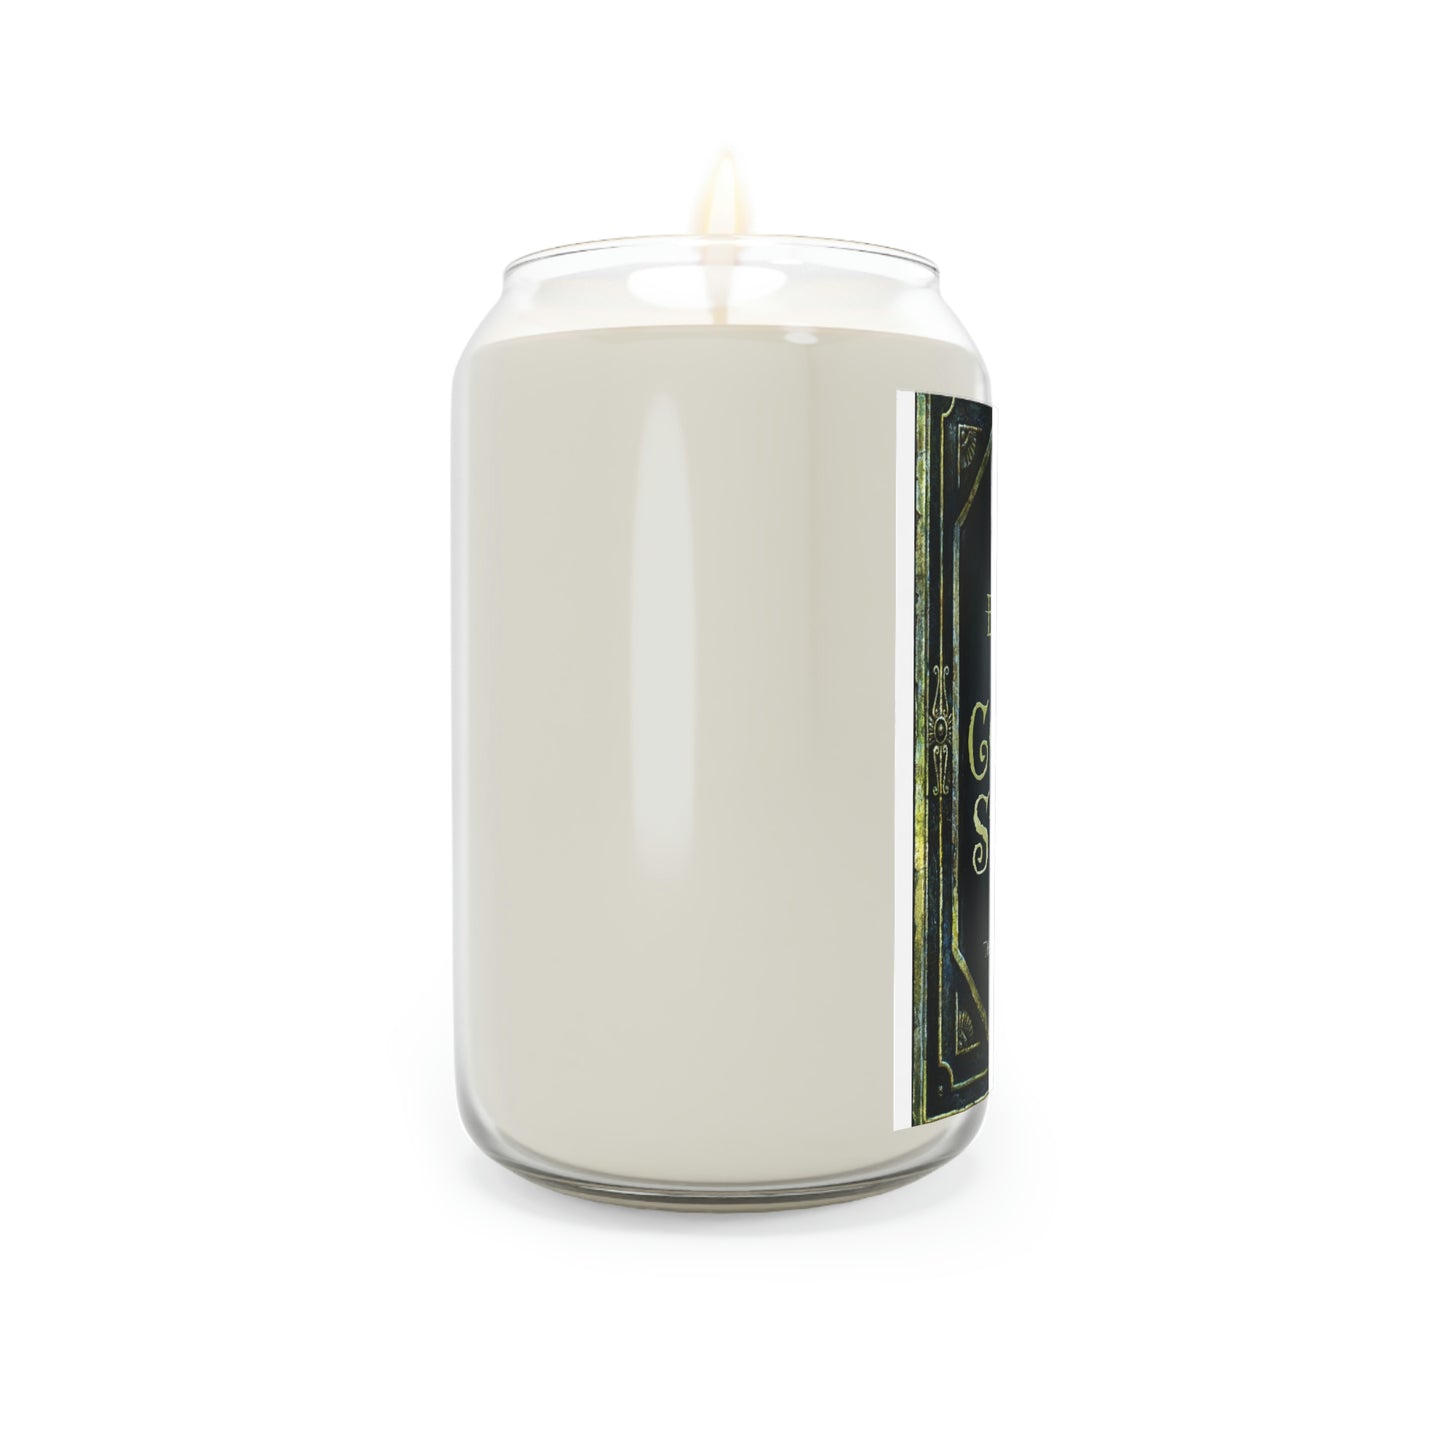 Embrace The Coming Storm - Scented Candle